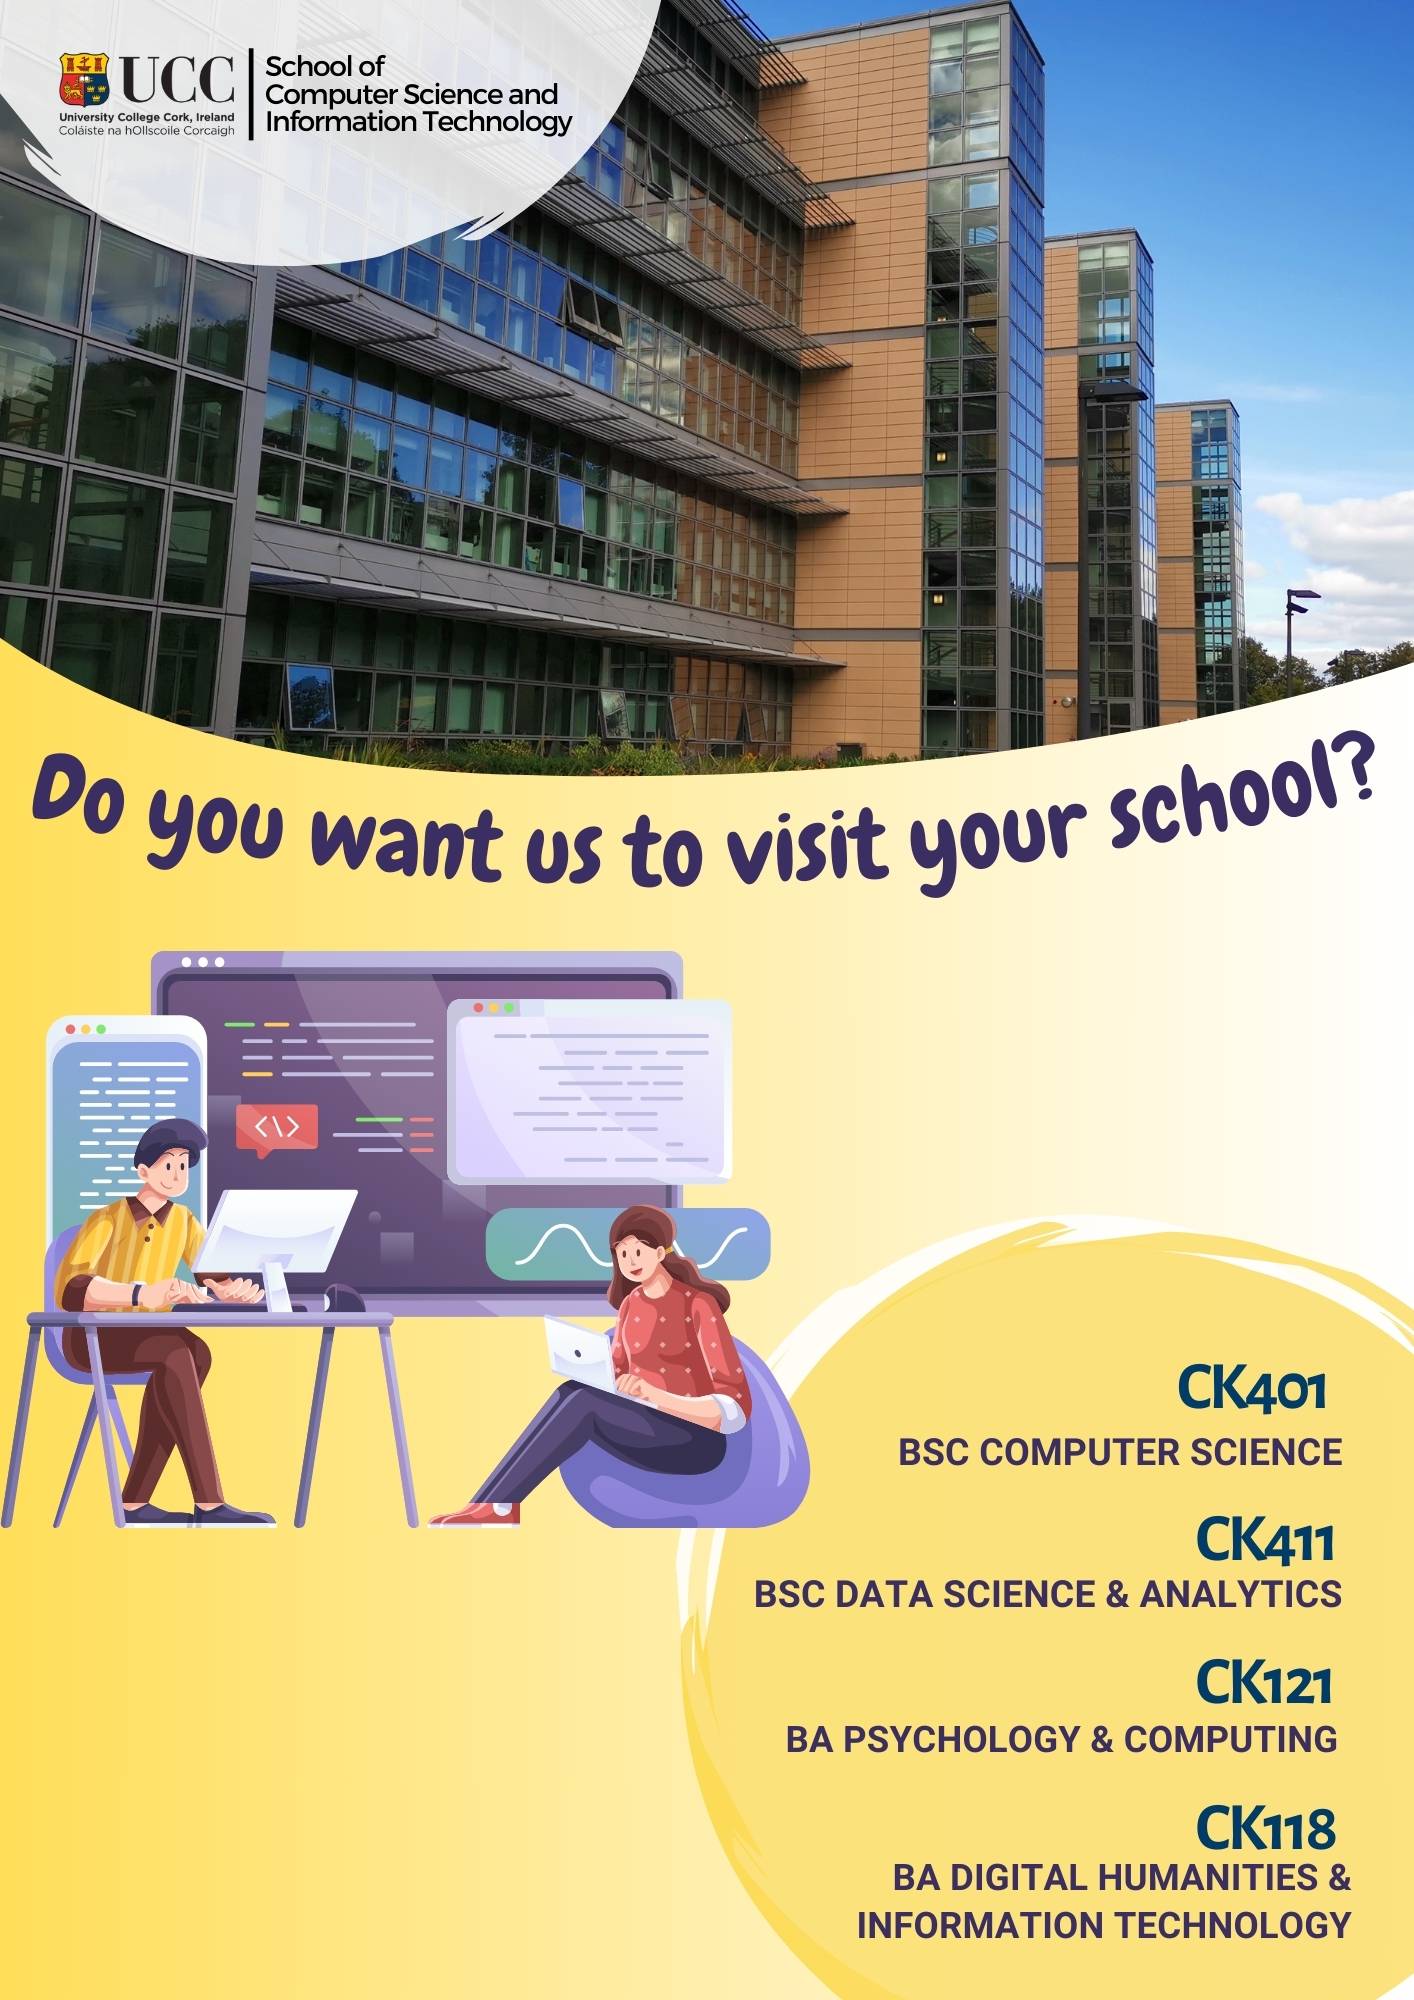 School visit poster, CSIT lecturers can visit your secondary school. info repeated in text